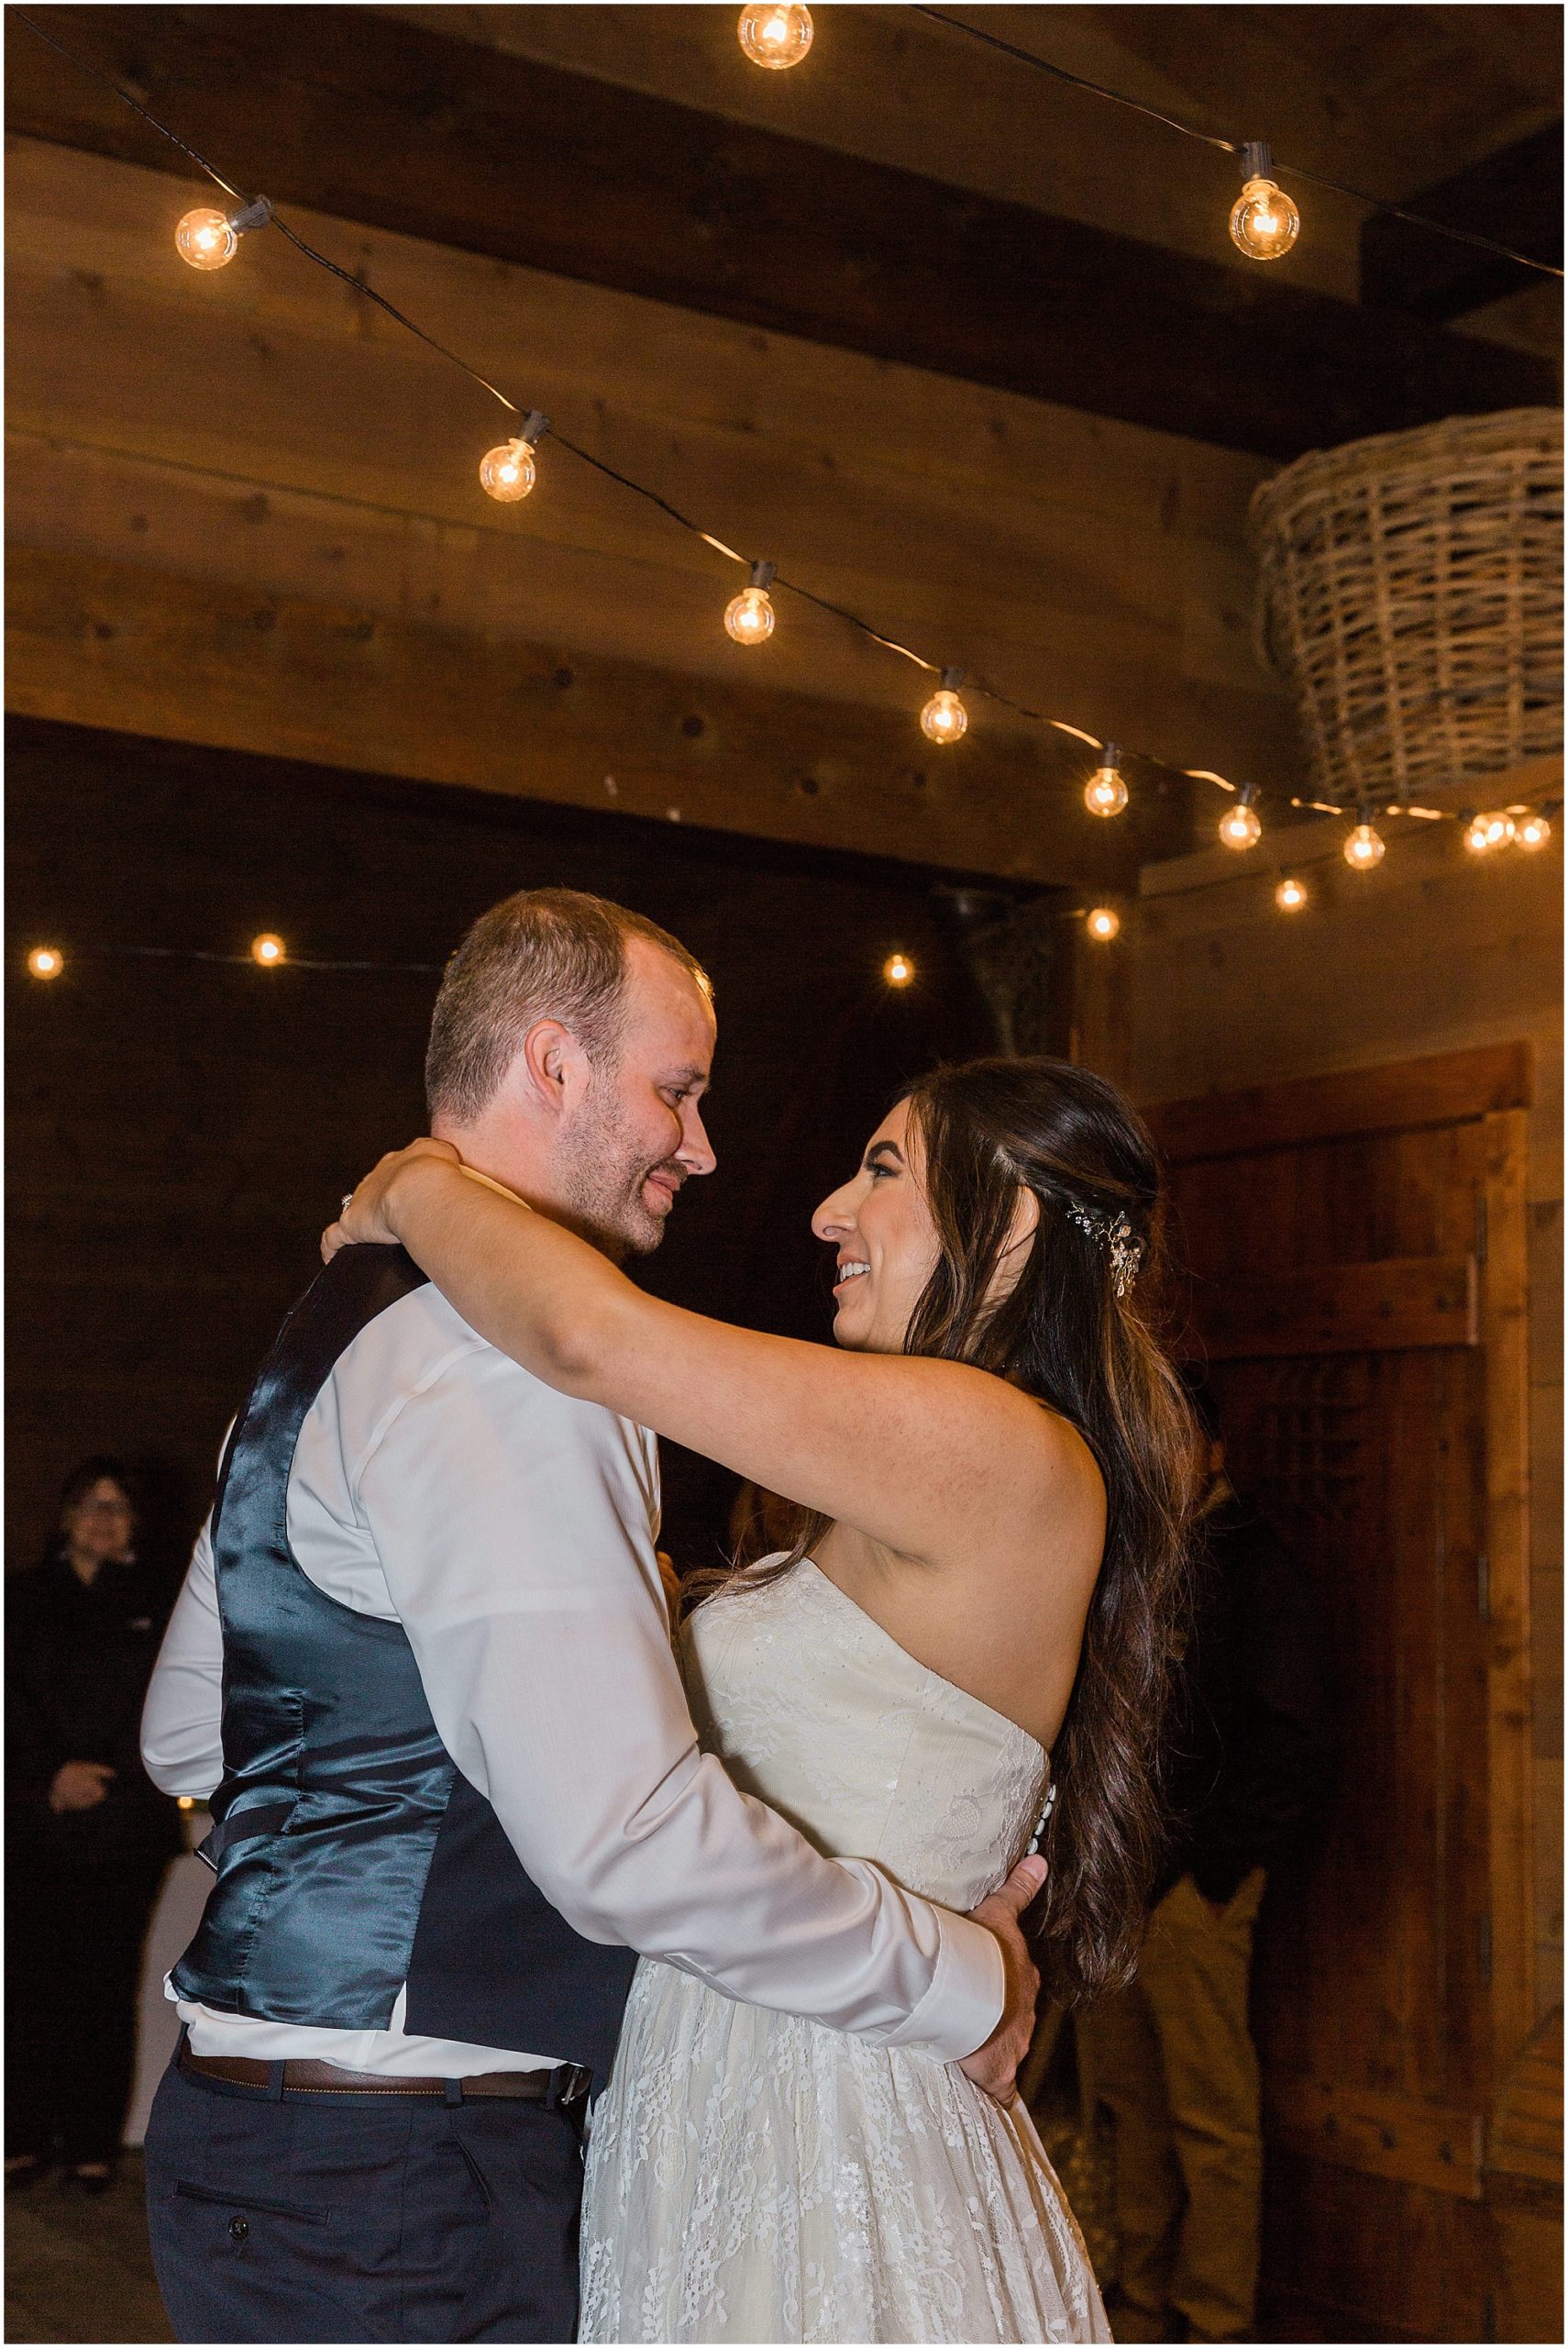 The wedding couple has their first dance under the string lights decorating the Tuscan Stables wedding venue at Ranch at the Canyons in Oregon. | Erica Swantek Photography